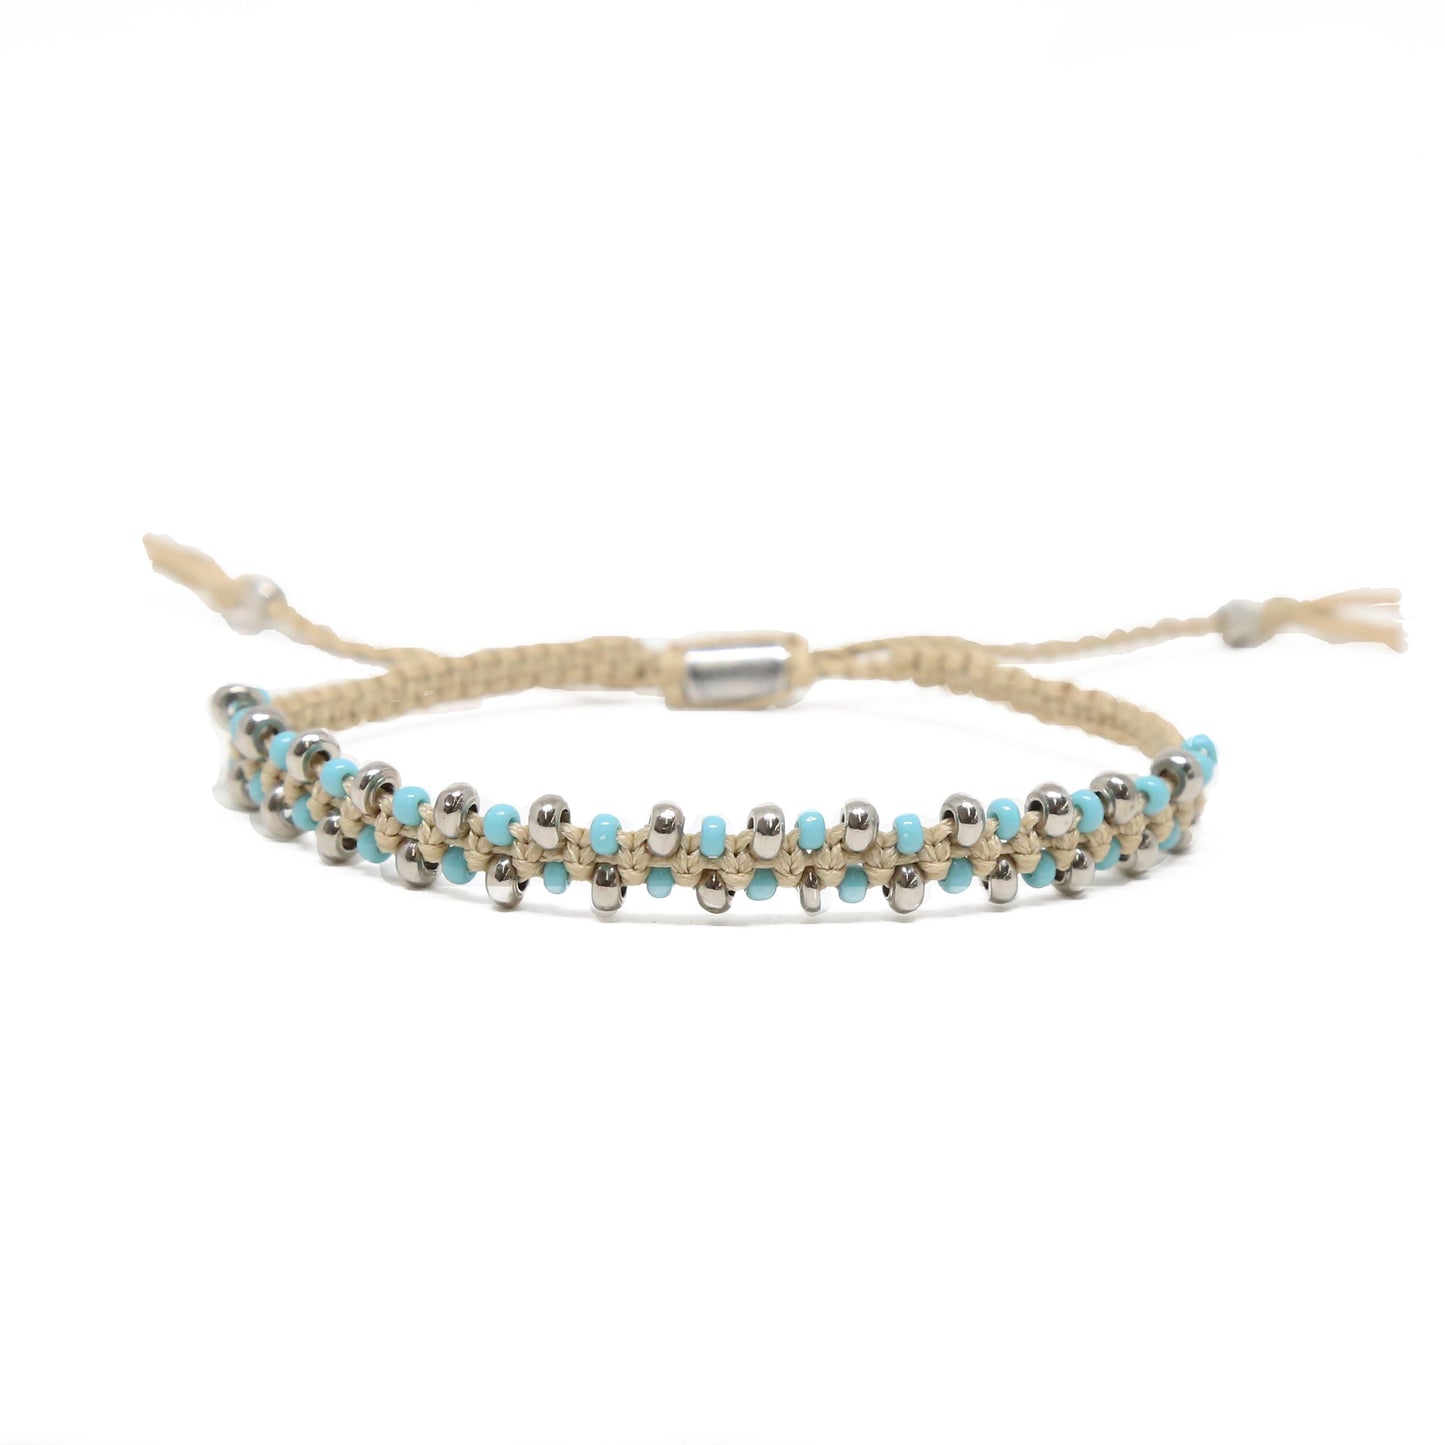 Sound of the Siren Bracelet in Turquoise, Silver, and Tan